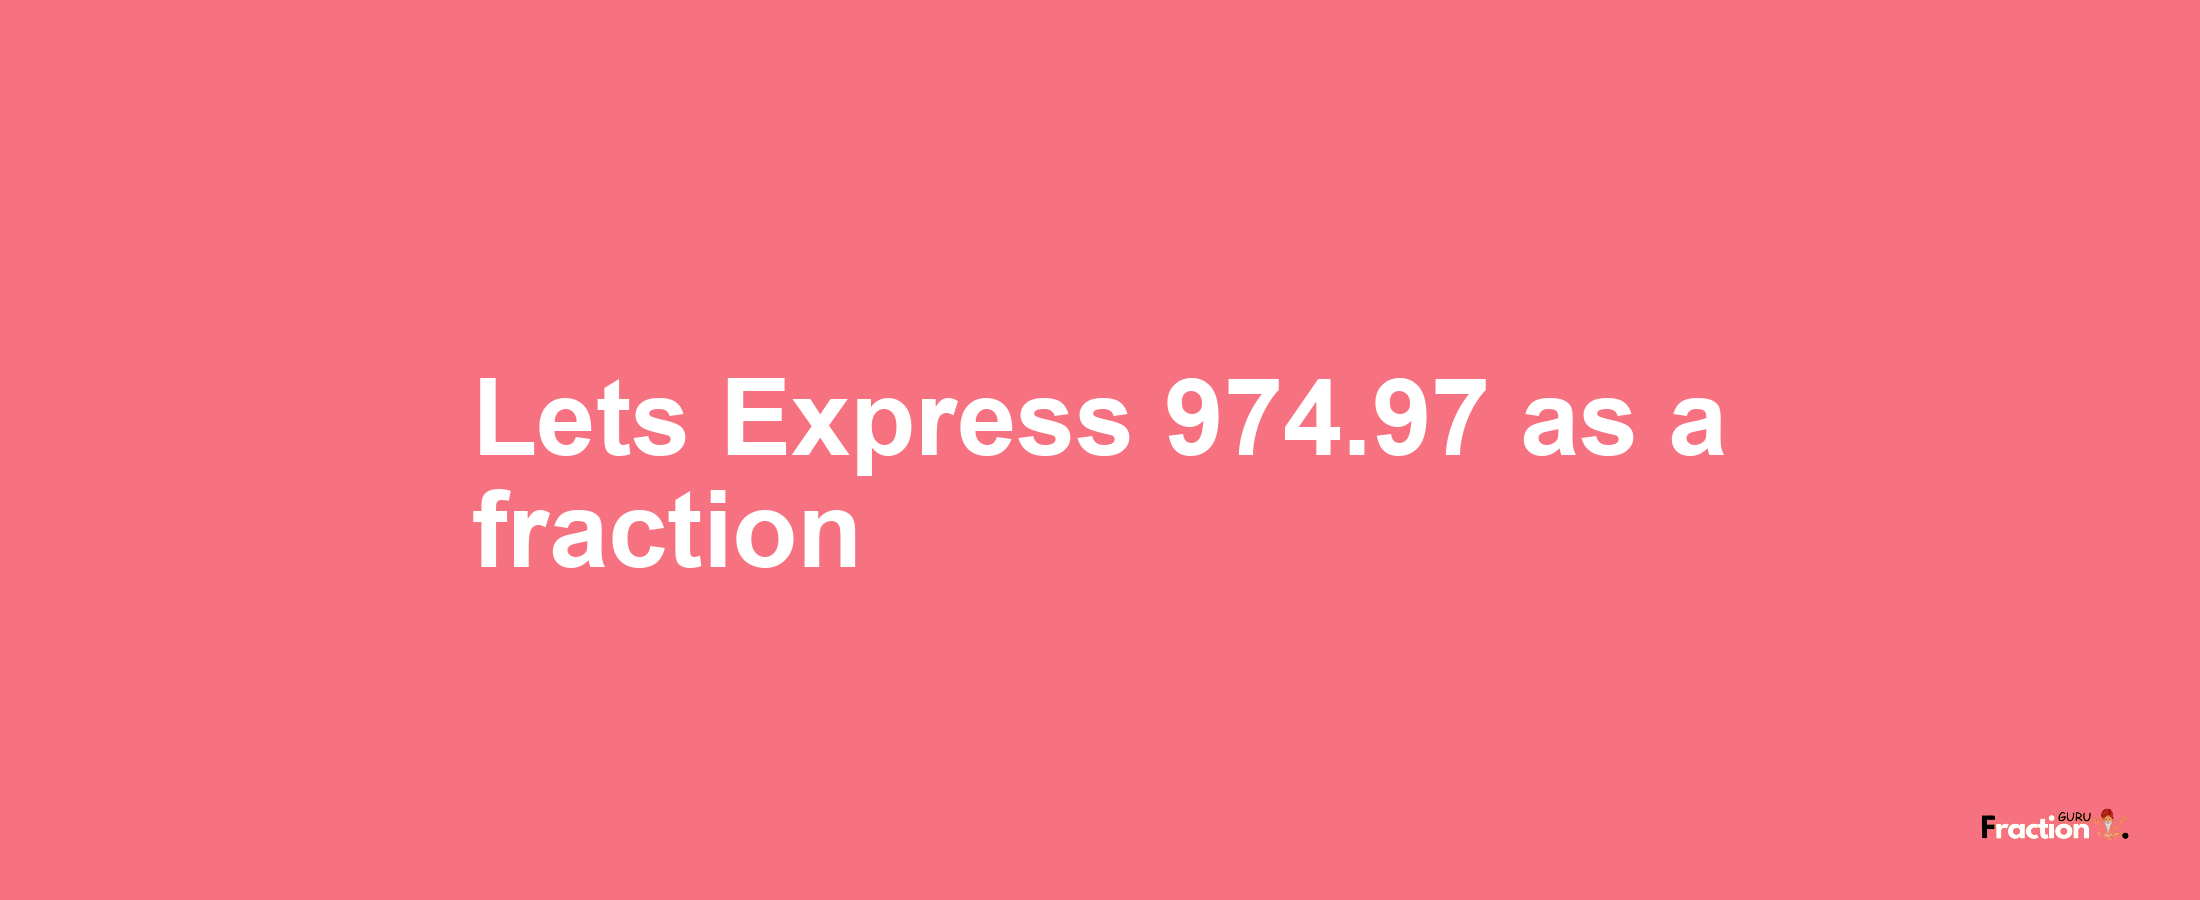 Lets Express 974.97 as afraction